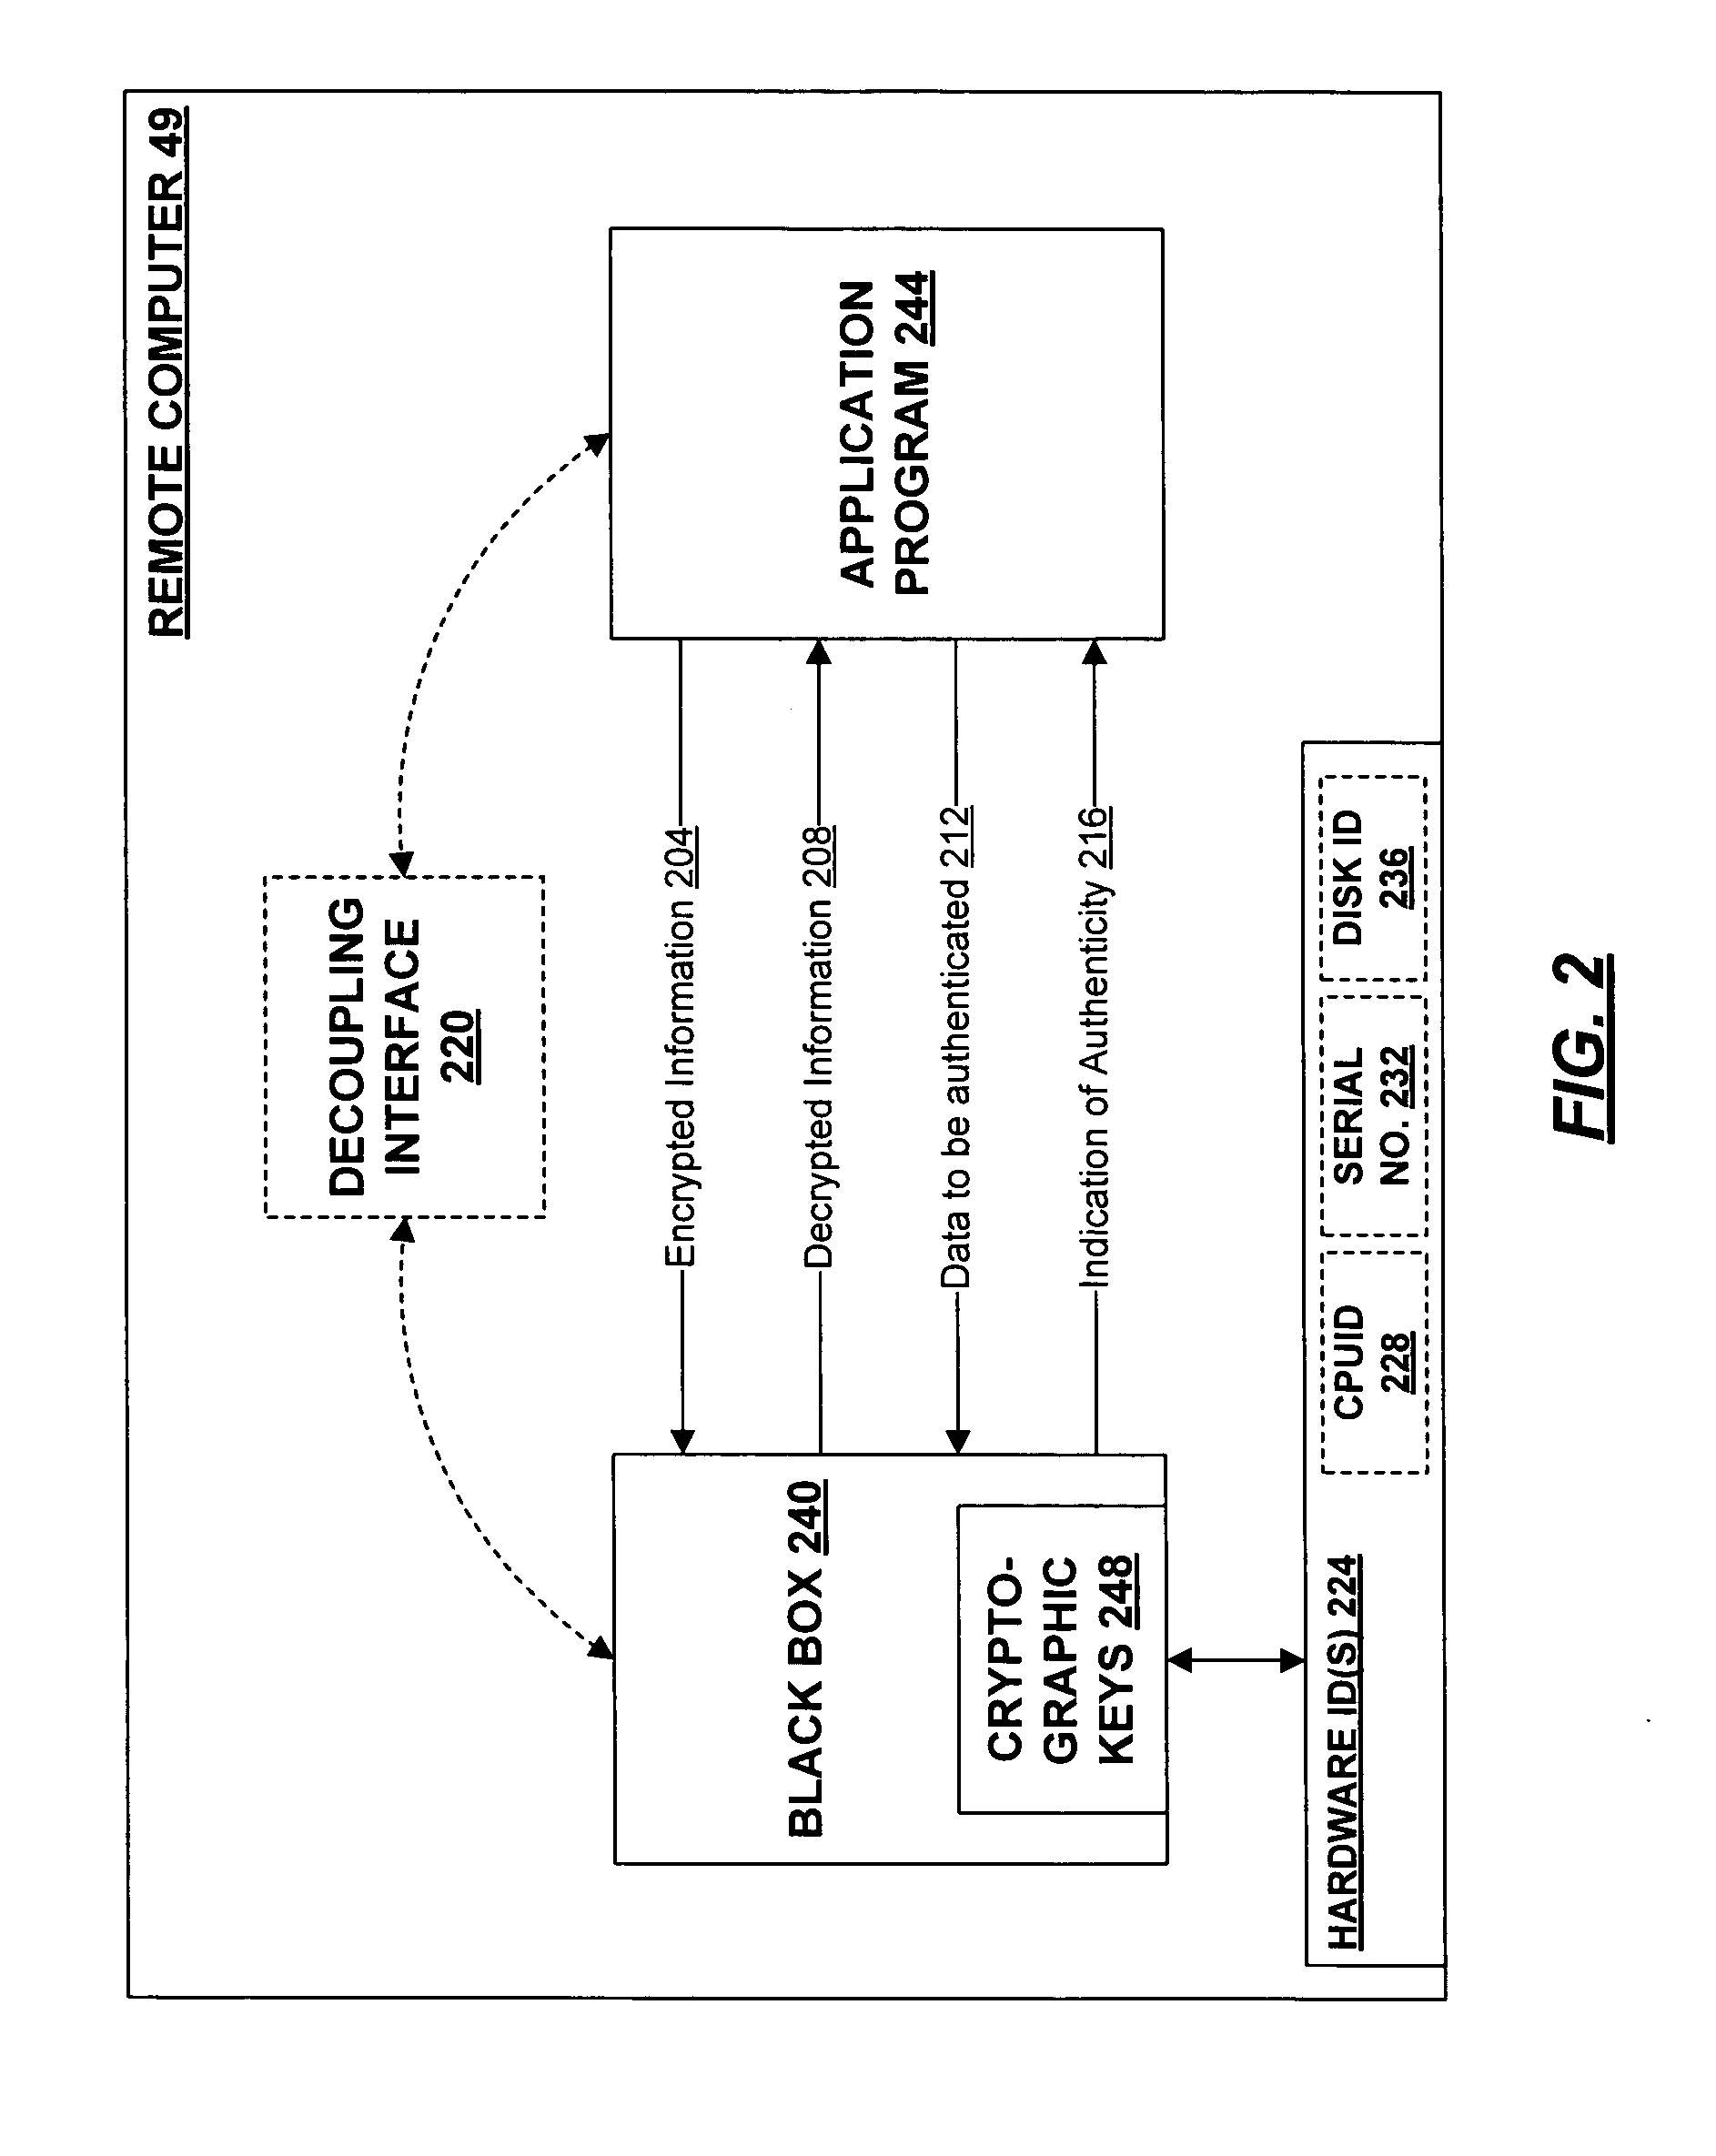 System and method for interfacing a software process to secure repositories